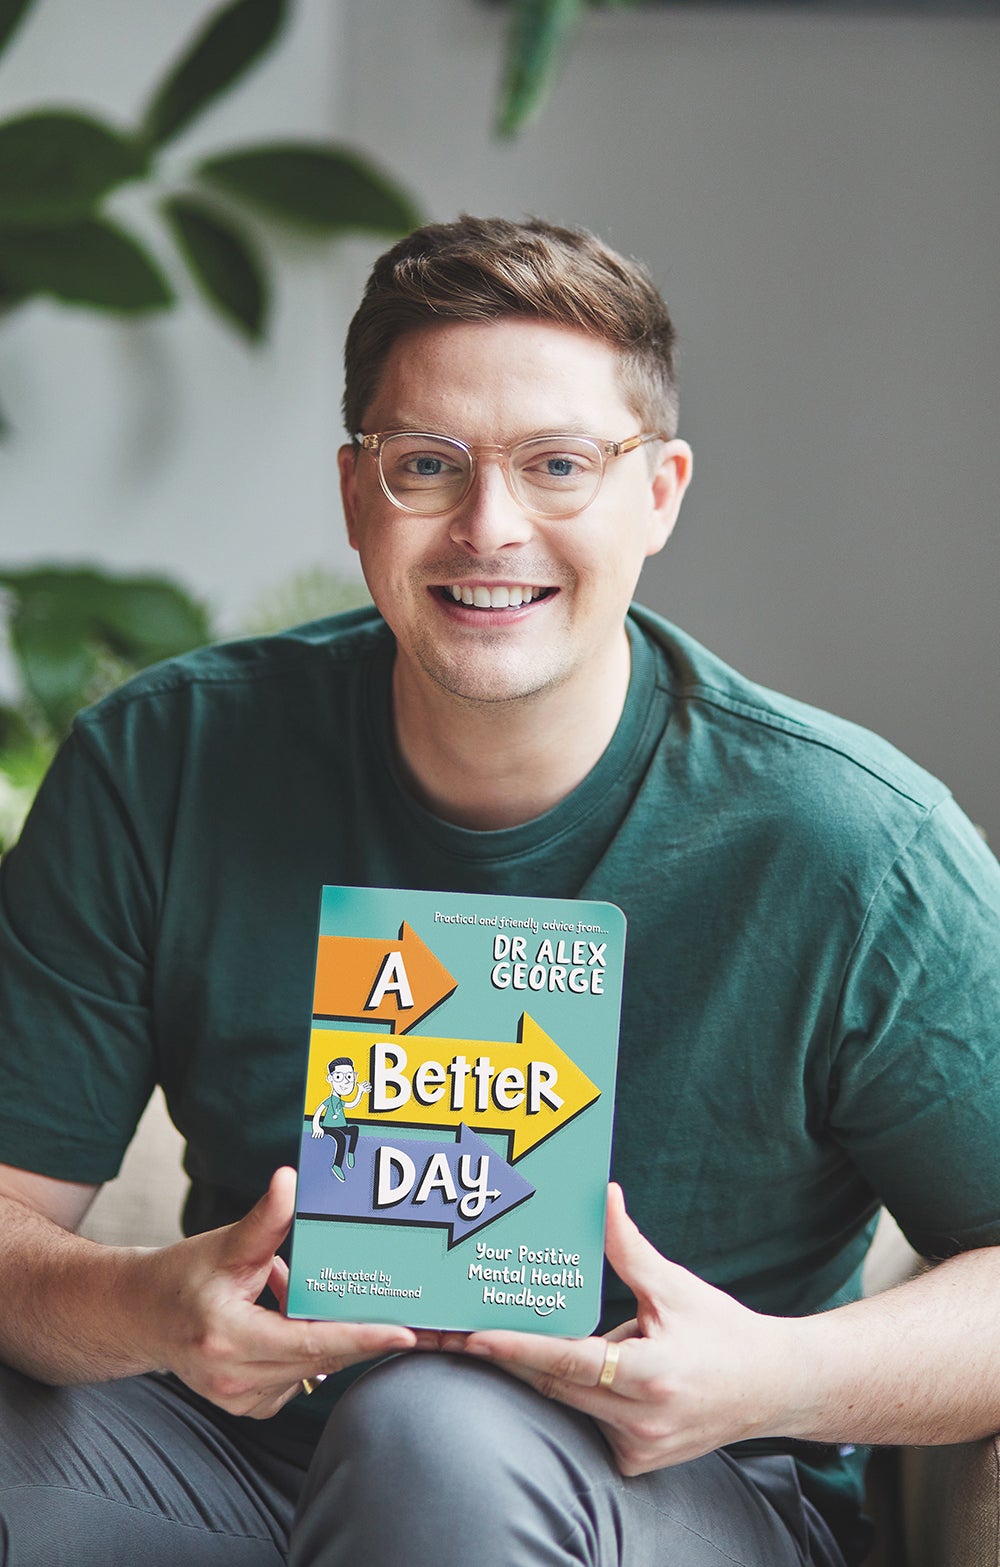 Dr Alex George with his new book ‘A Better Day’